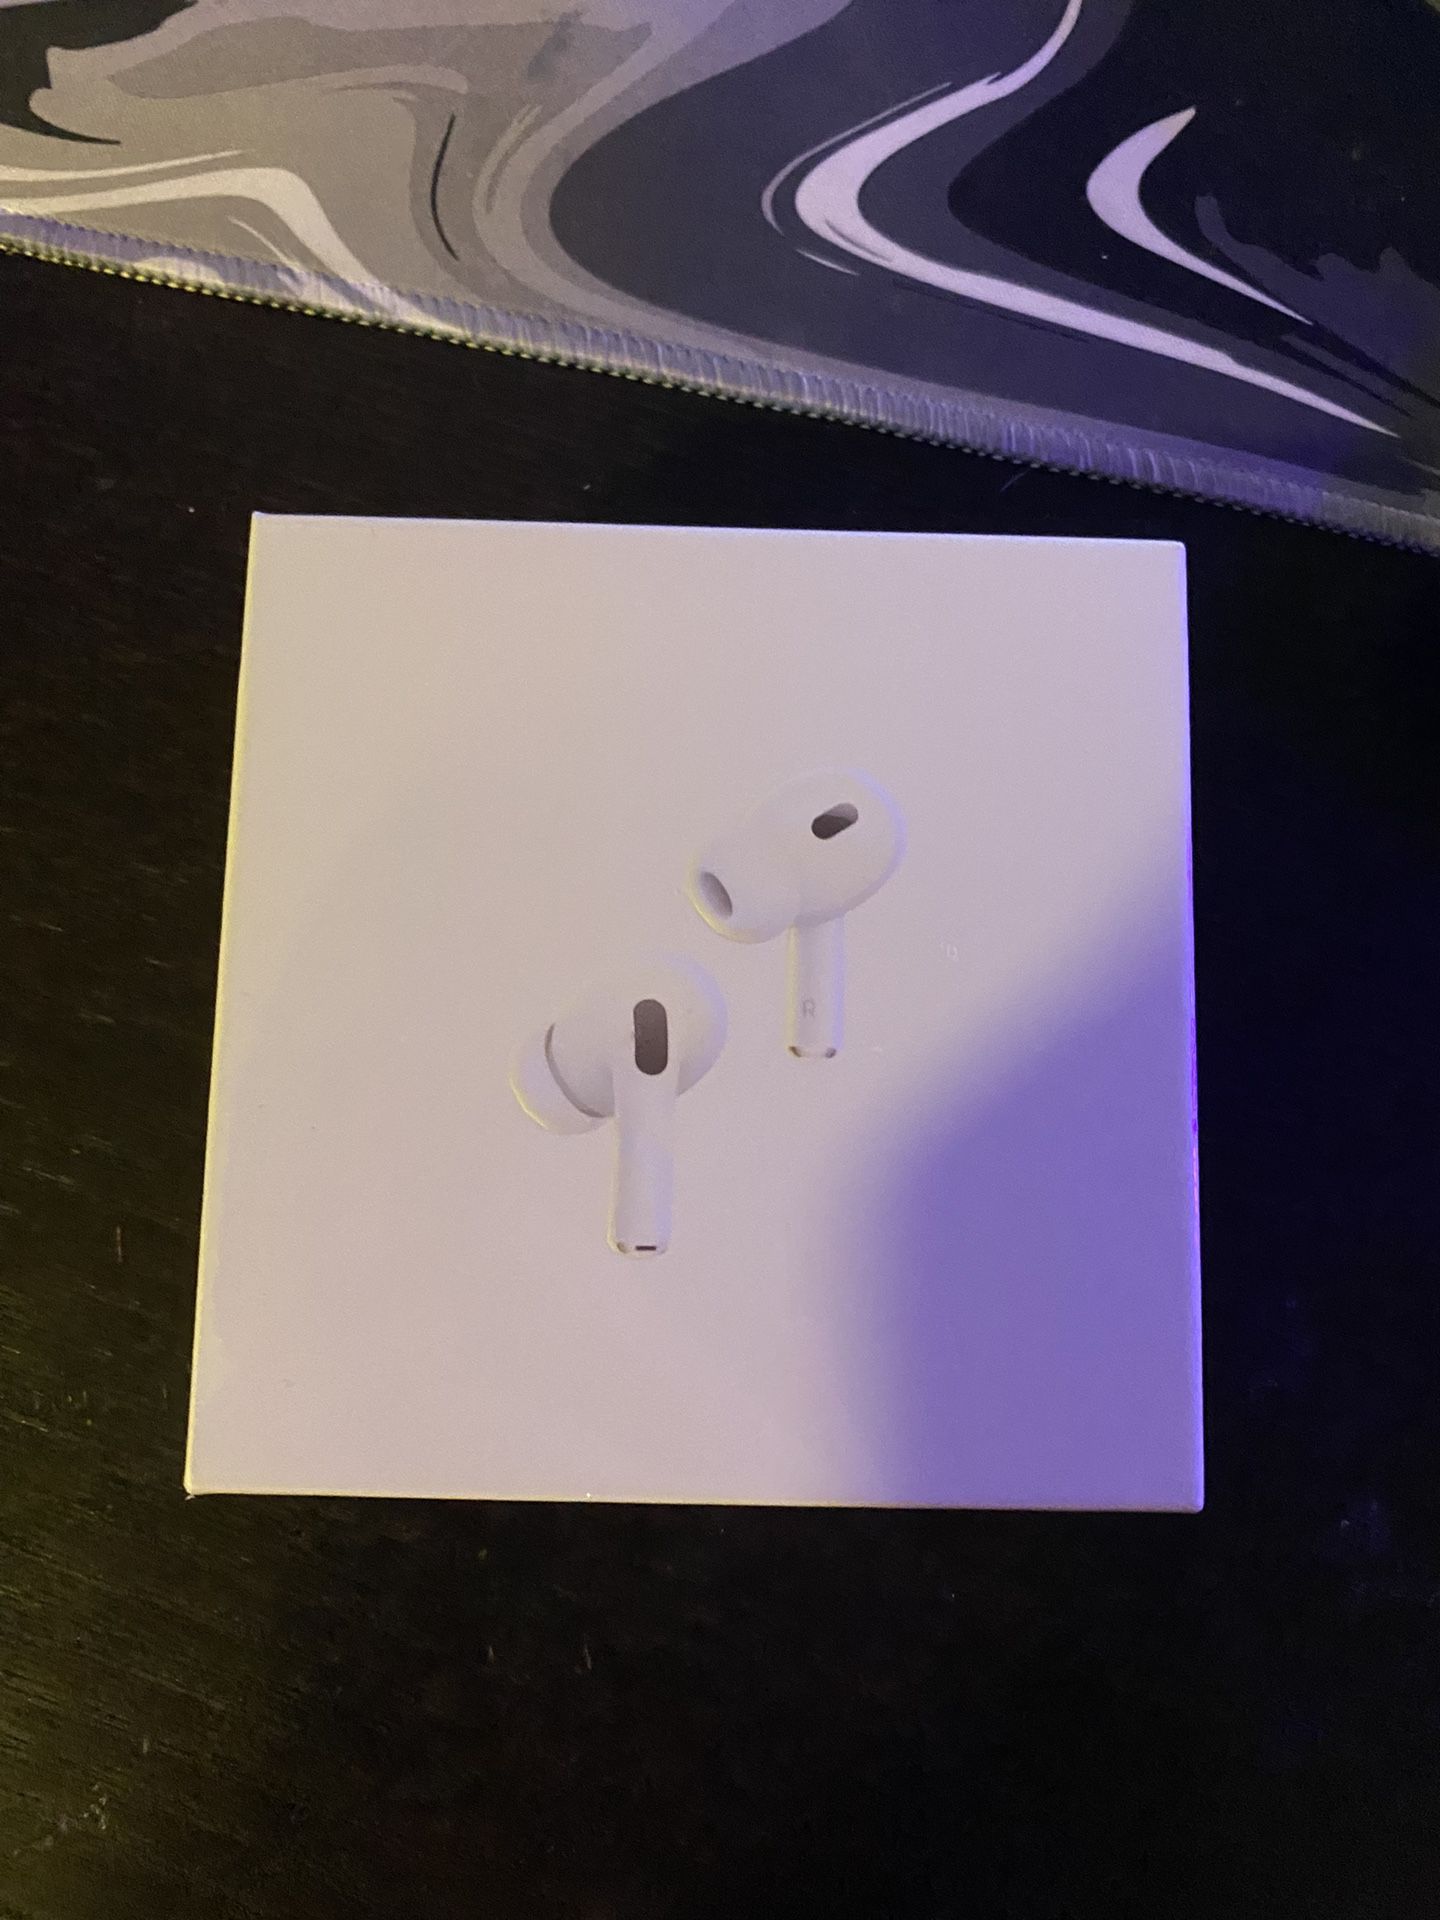 Apple AirPods Pro 2nd Generation Bluetooth - White (BEST OFFER)